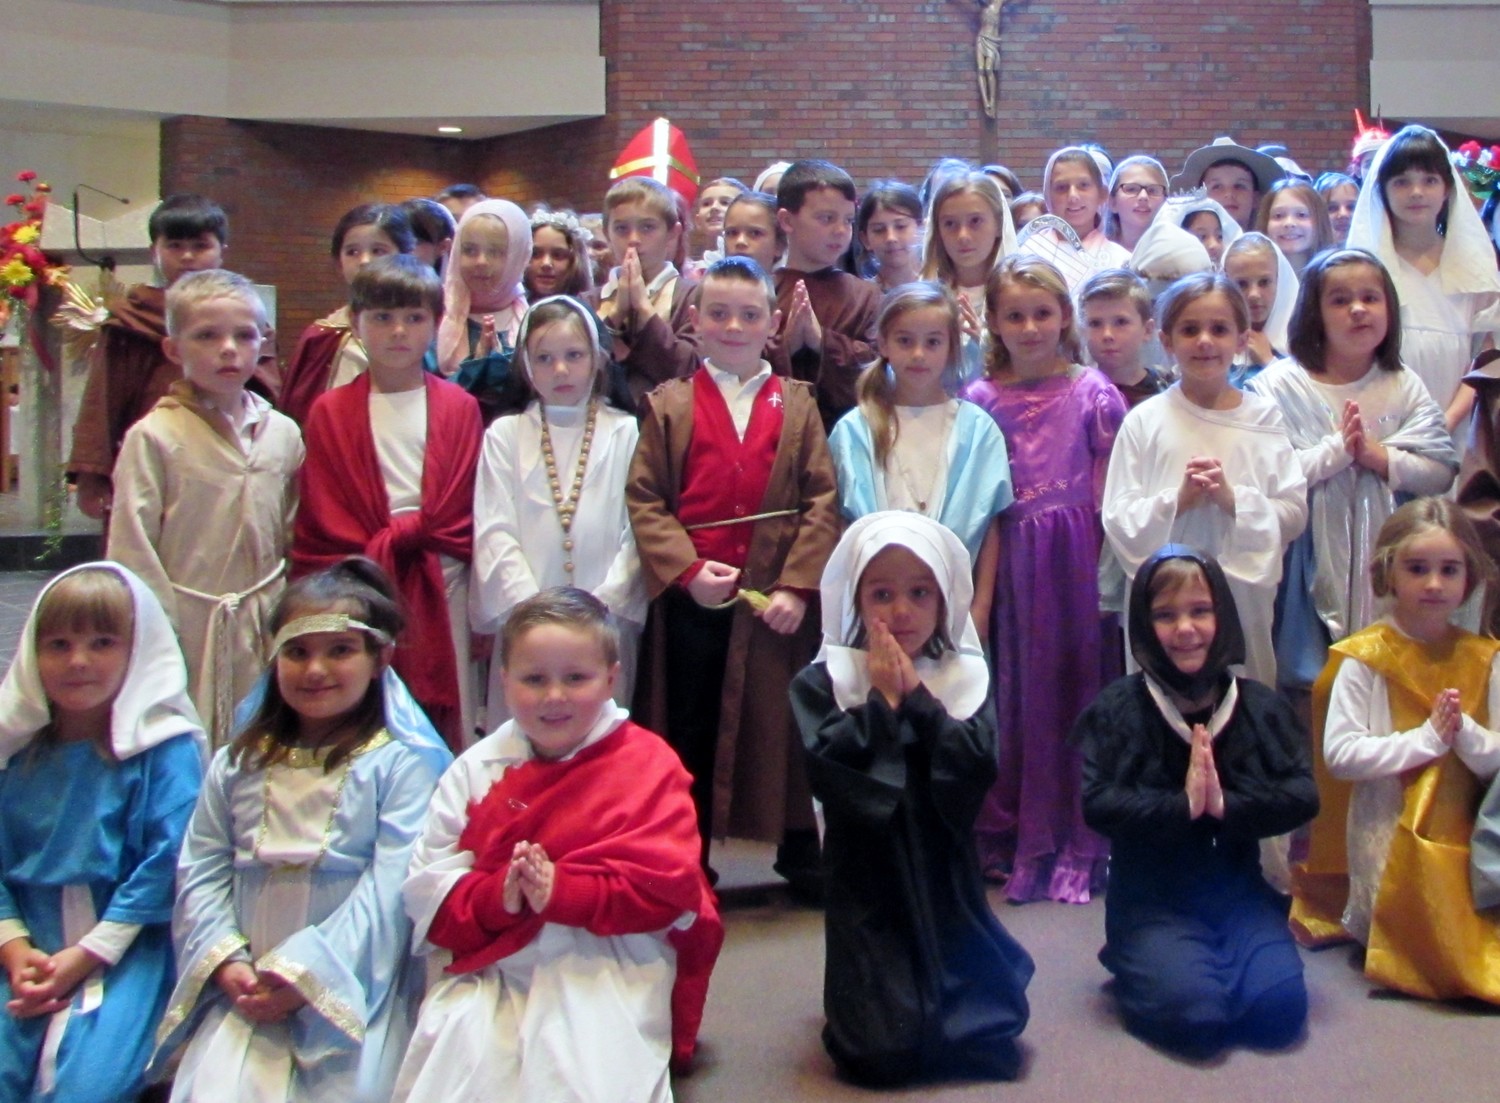 All Saints Day was a very special one at Saint Philip School in Greenville. To celebrate the day, many students researched the lives of saints, did special projects and created costumes to commemorate their saints. Students attended the All Saints Day Mass dressed as their saint of choice.